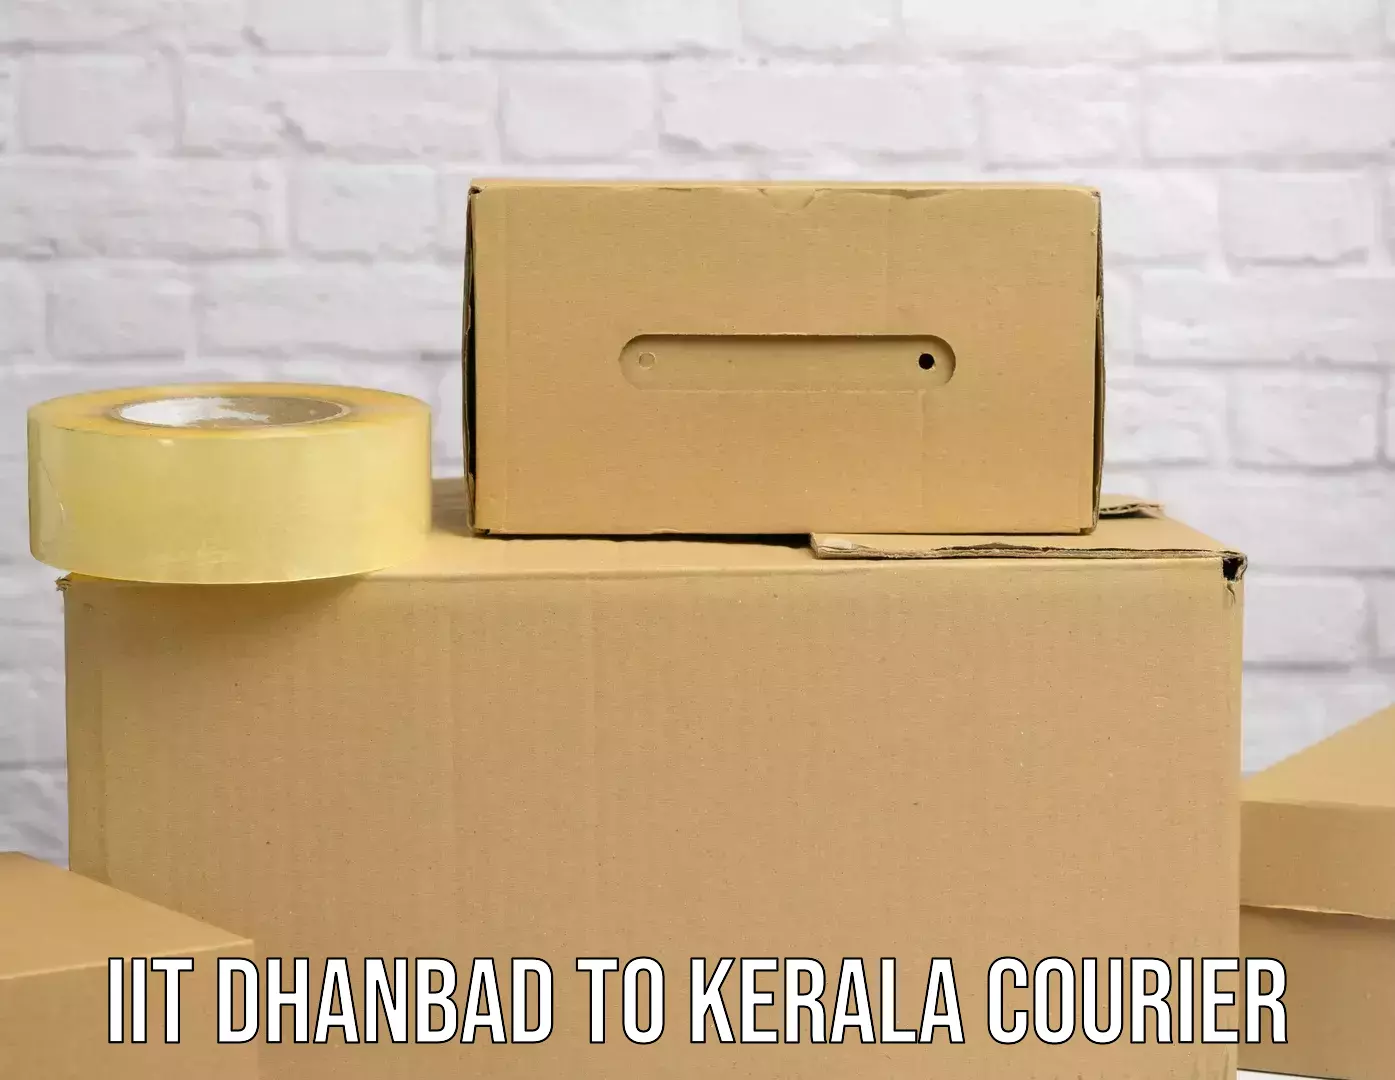 Affordable parcel service IIT Dhanbad to Nedumkandam